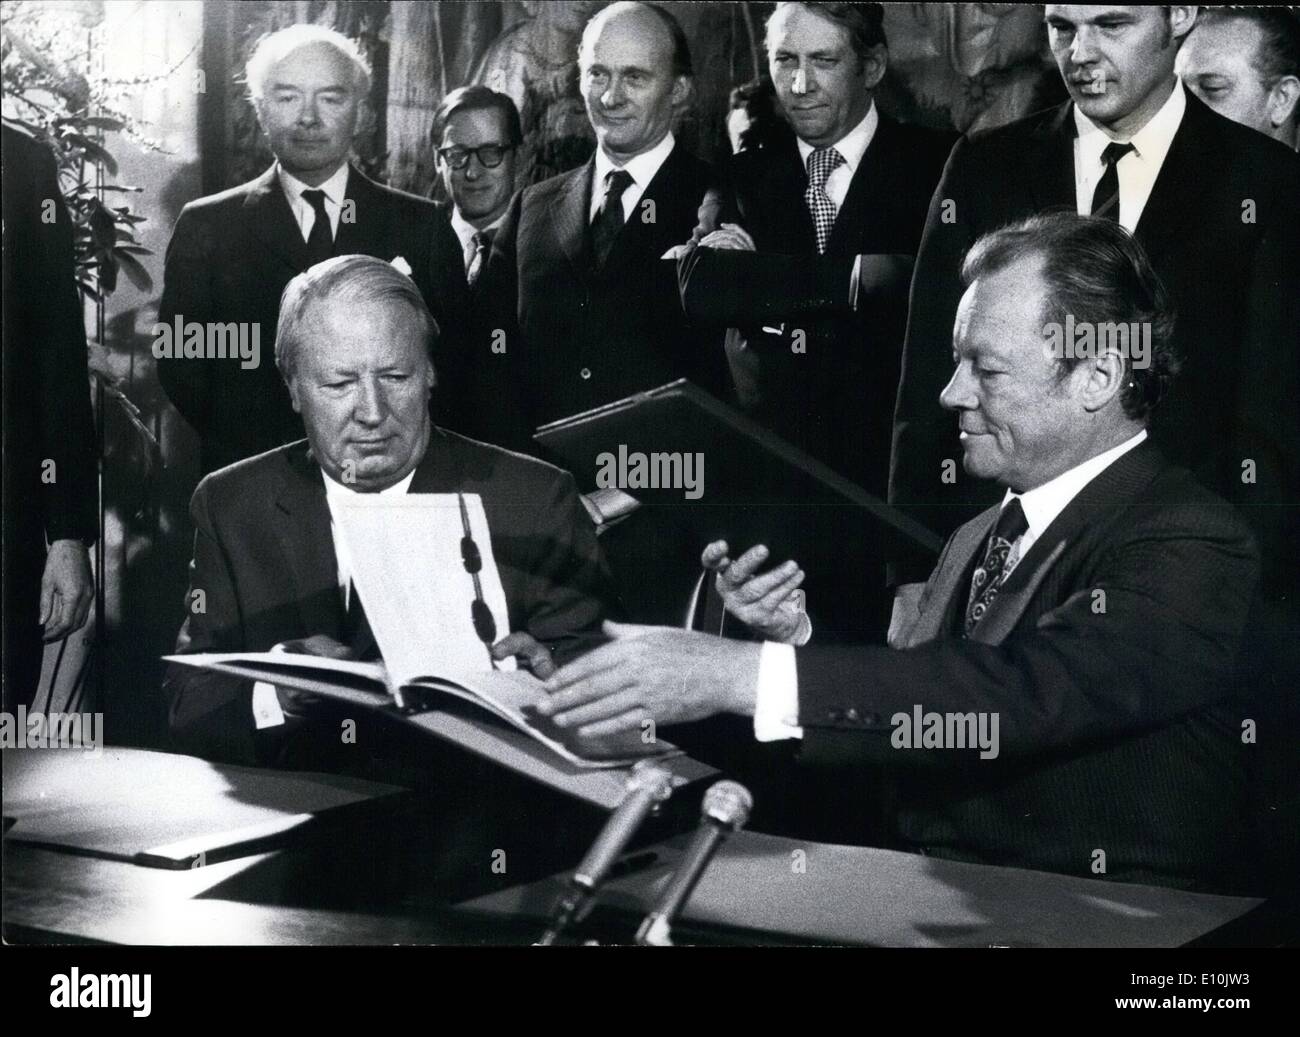 Mar. 03, 1973 - Britain's Prime Minister Mr. Heath and the West German Chancellor Herr Brandt are pictured in Bonn during Mr. Heath's recent visit, when they signed an agreement setting up an Anglo-German foundation to study industrial society and its problems. Stock Photo